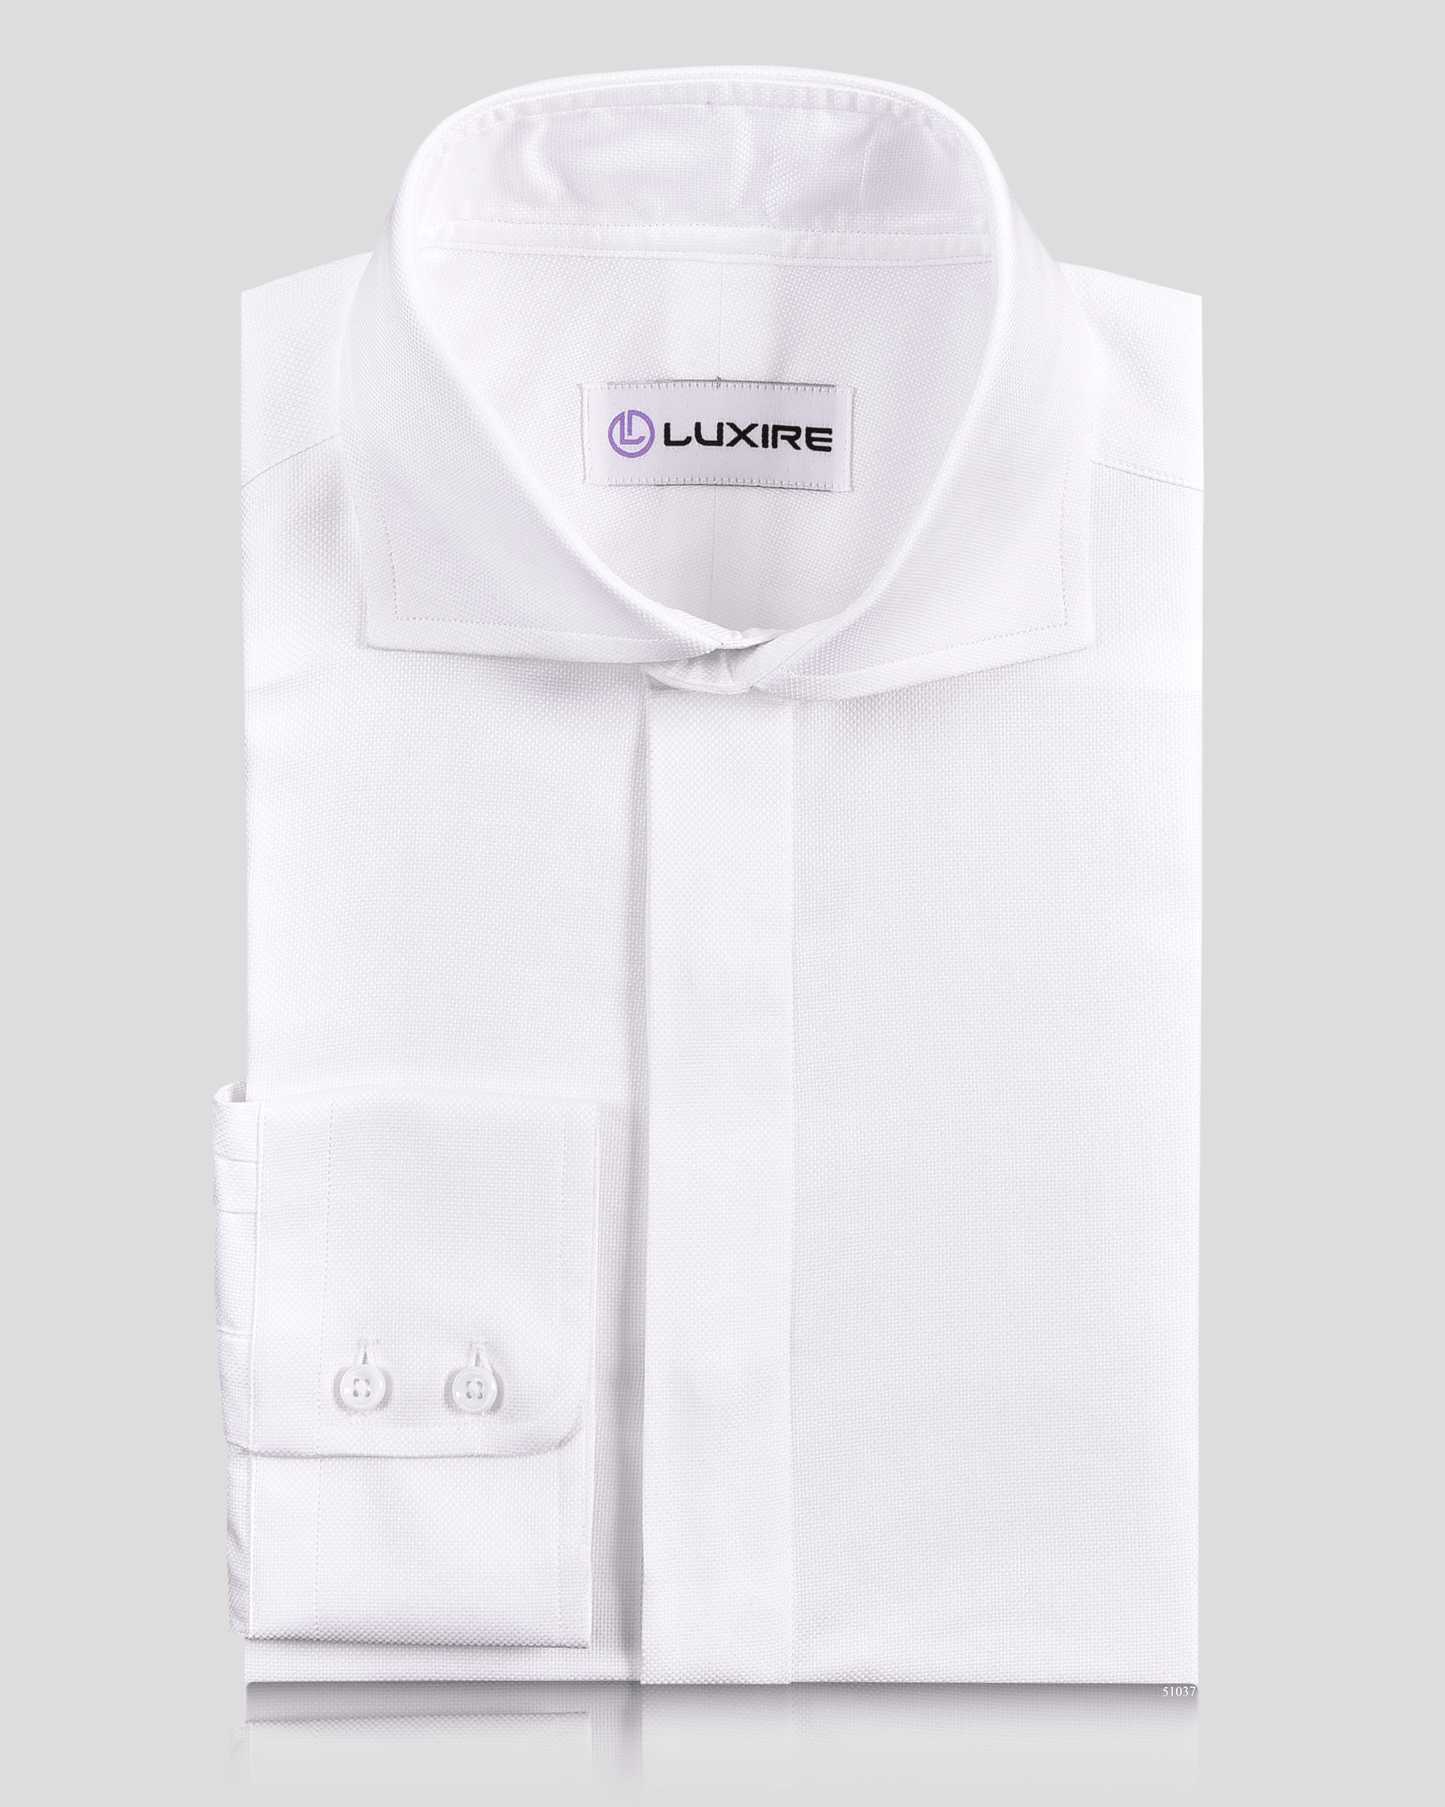 Front of the custom oxford shirt for men by Luxire in white royal